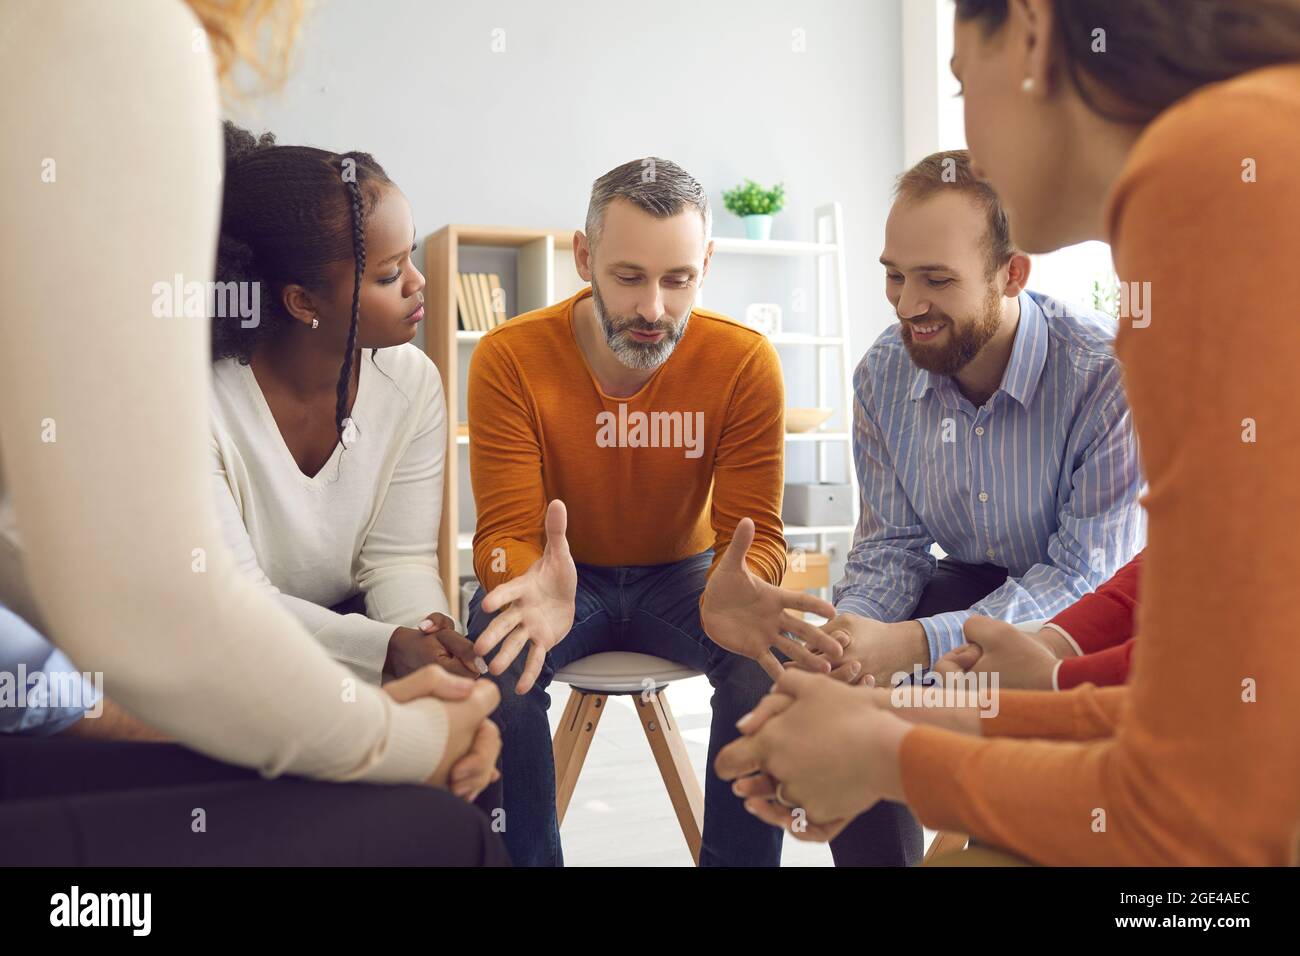 Professional therapist talking to diverse patients during a group therapy session Stock Photo